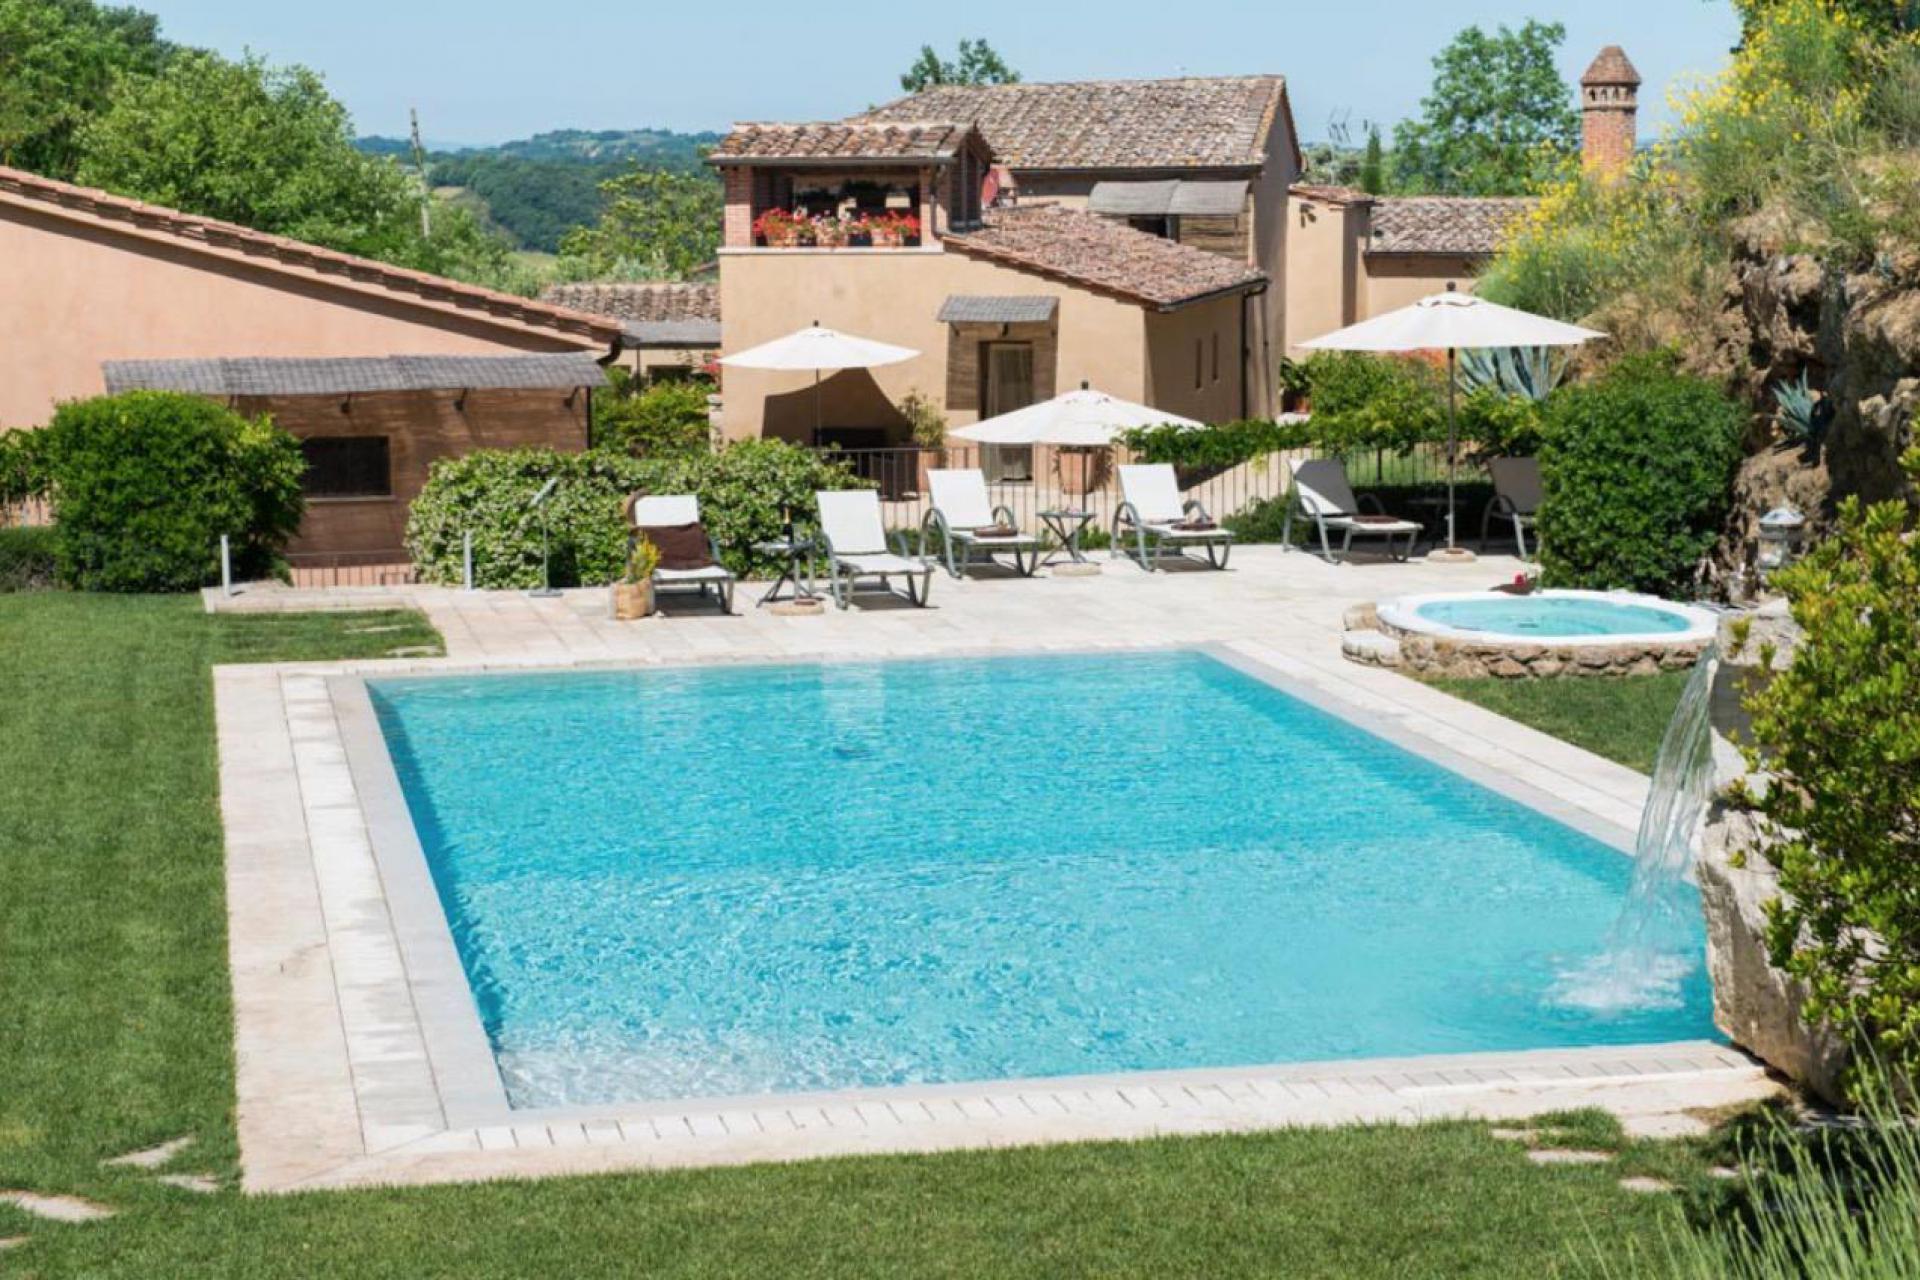 Luxurious agriturismo in a renovated watermill